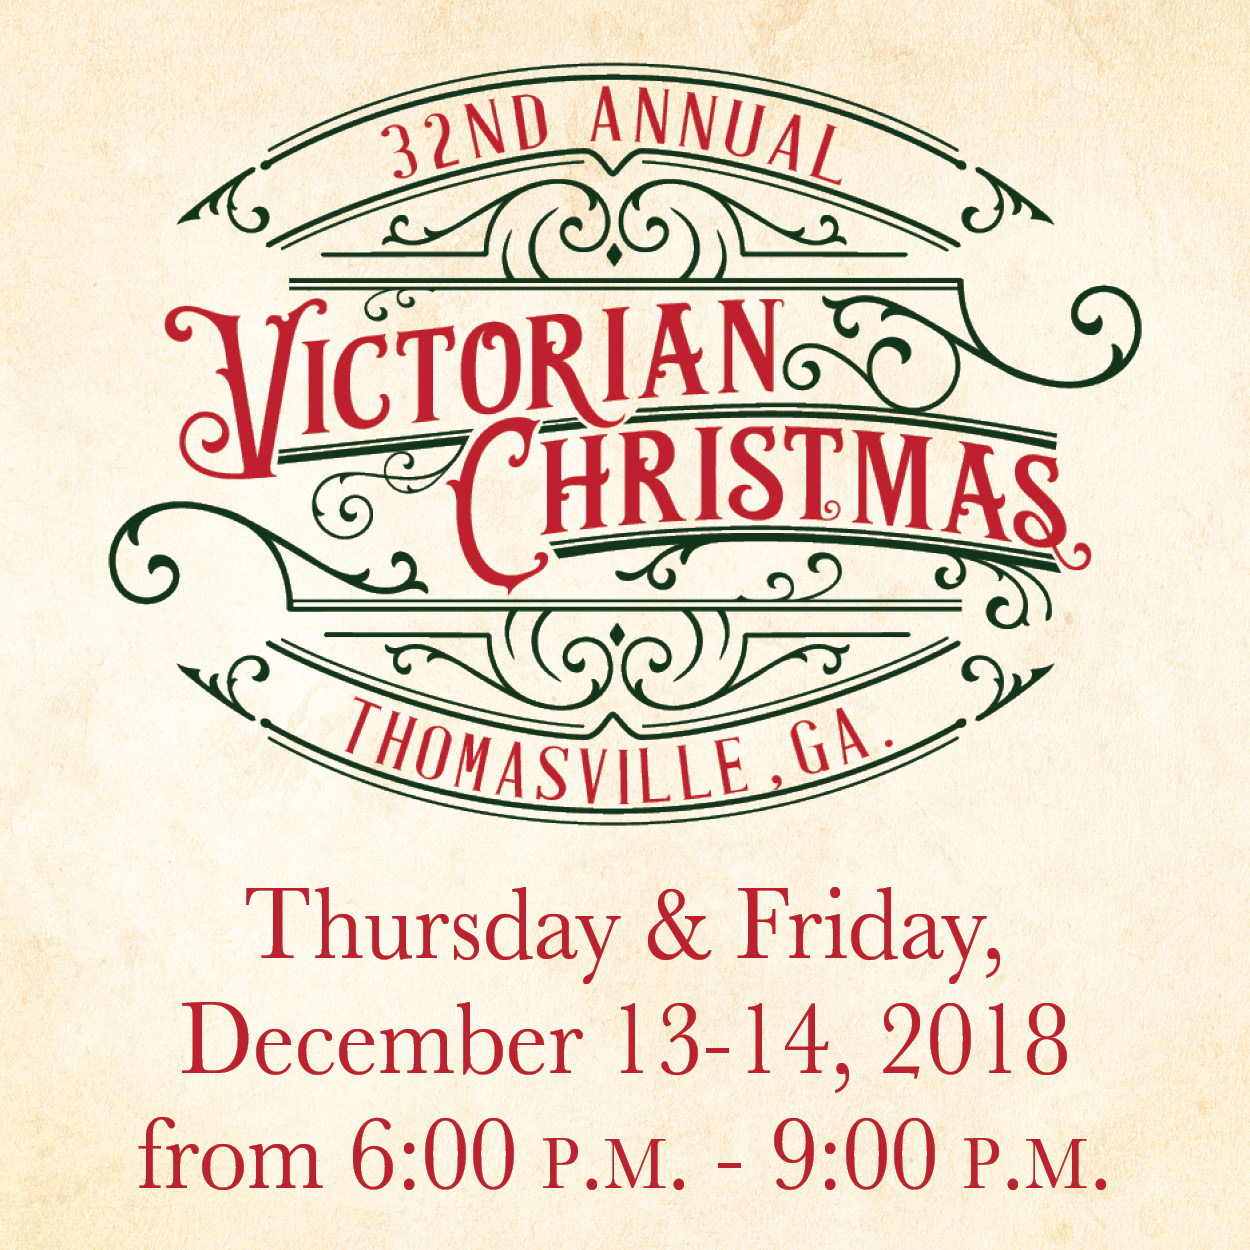 Photo for CITY OF THOMASVILLE HOSTS 32ND ANNUAL VICTORIAN CHRISTMAS